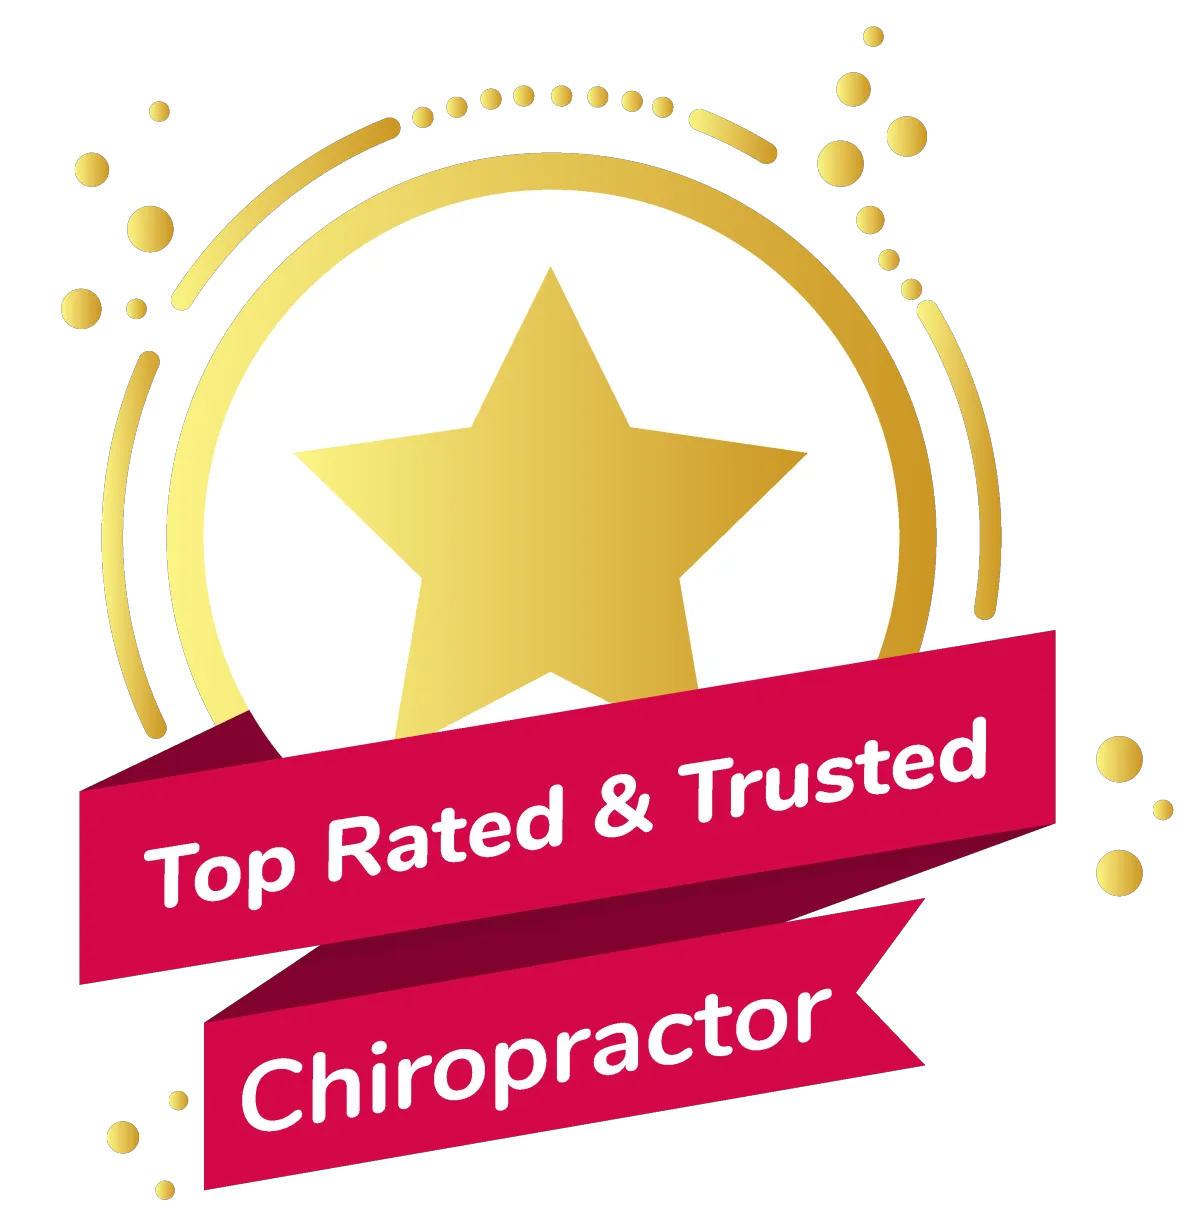 top rated & trusted chiropractor